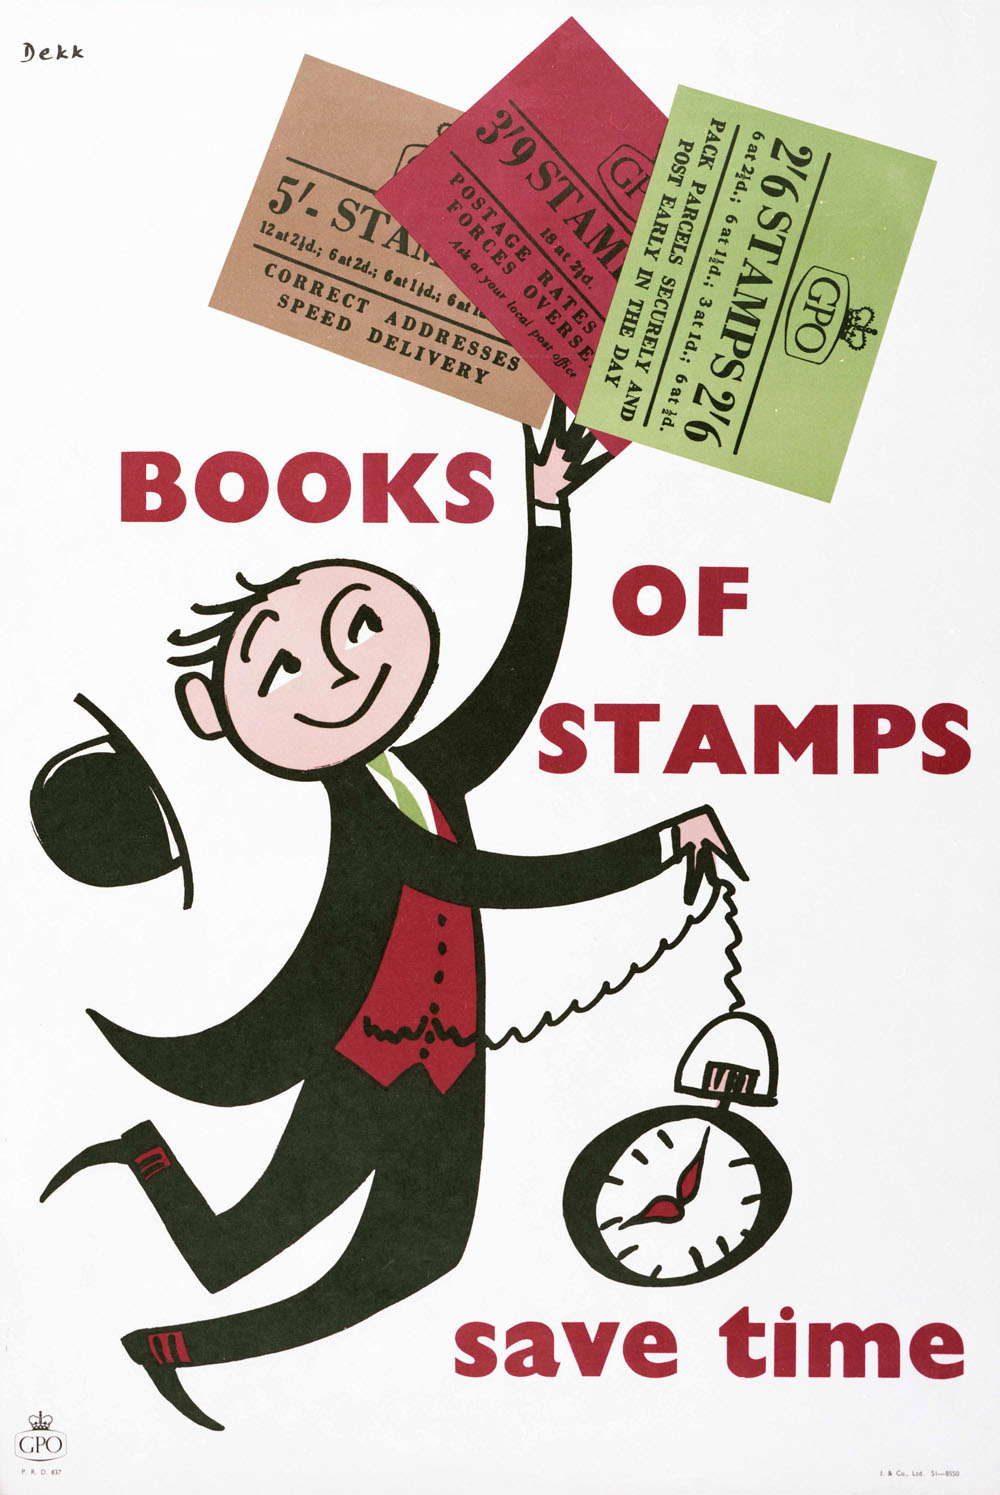 Books of stamps save time